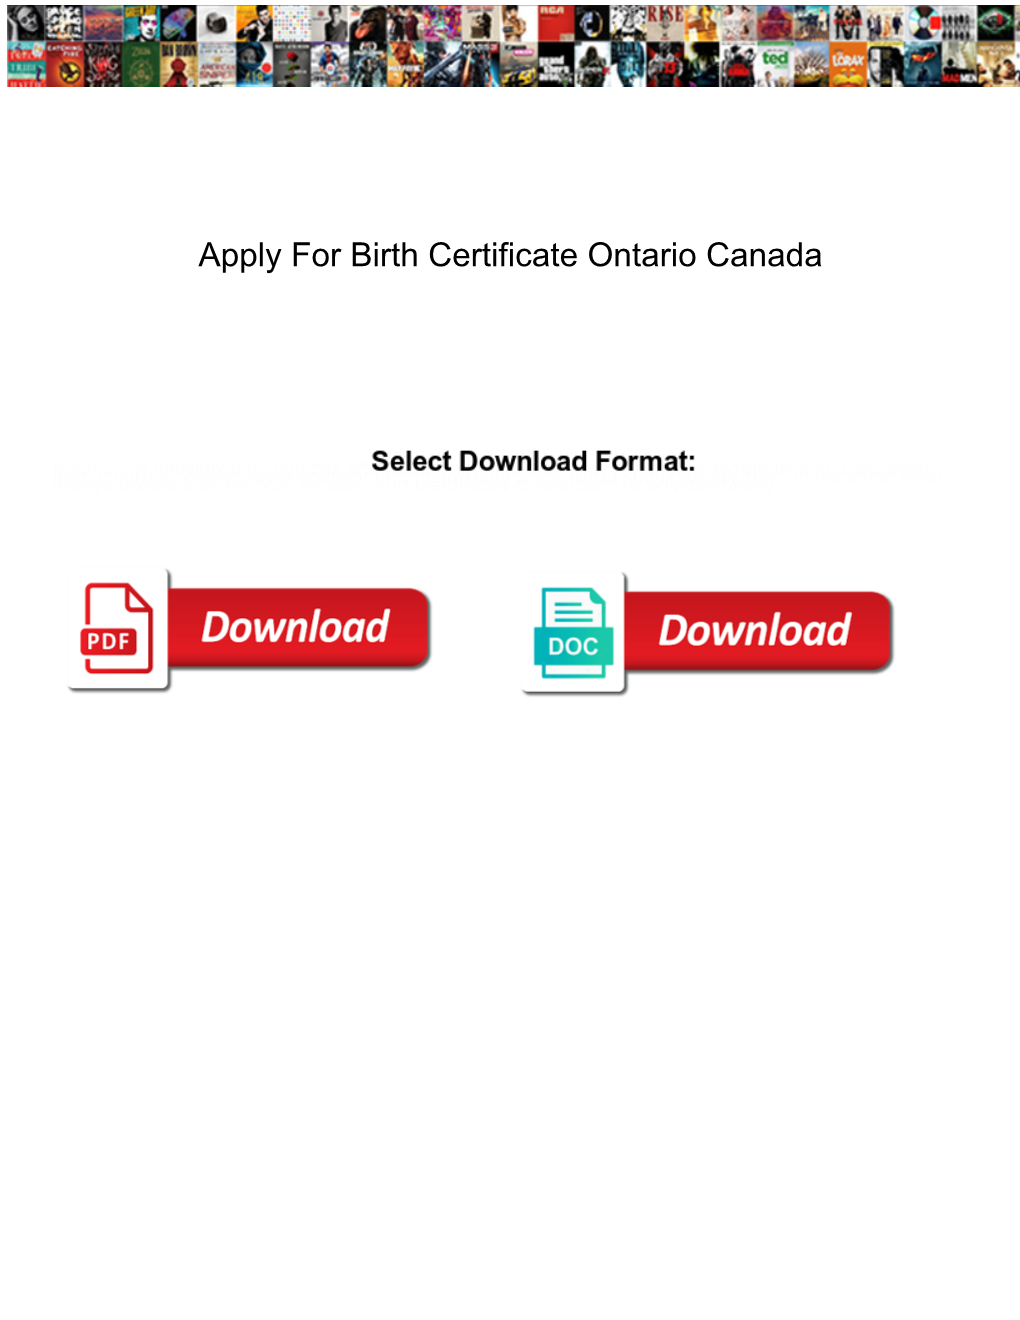 Apply for Birth Certificate Ontario Canada